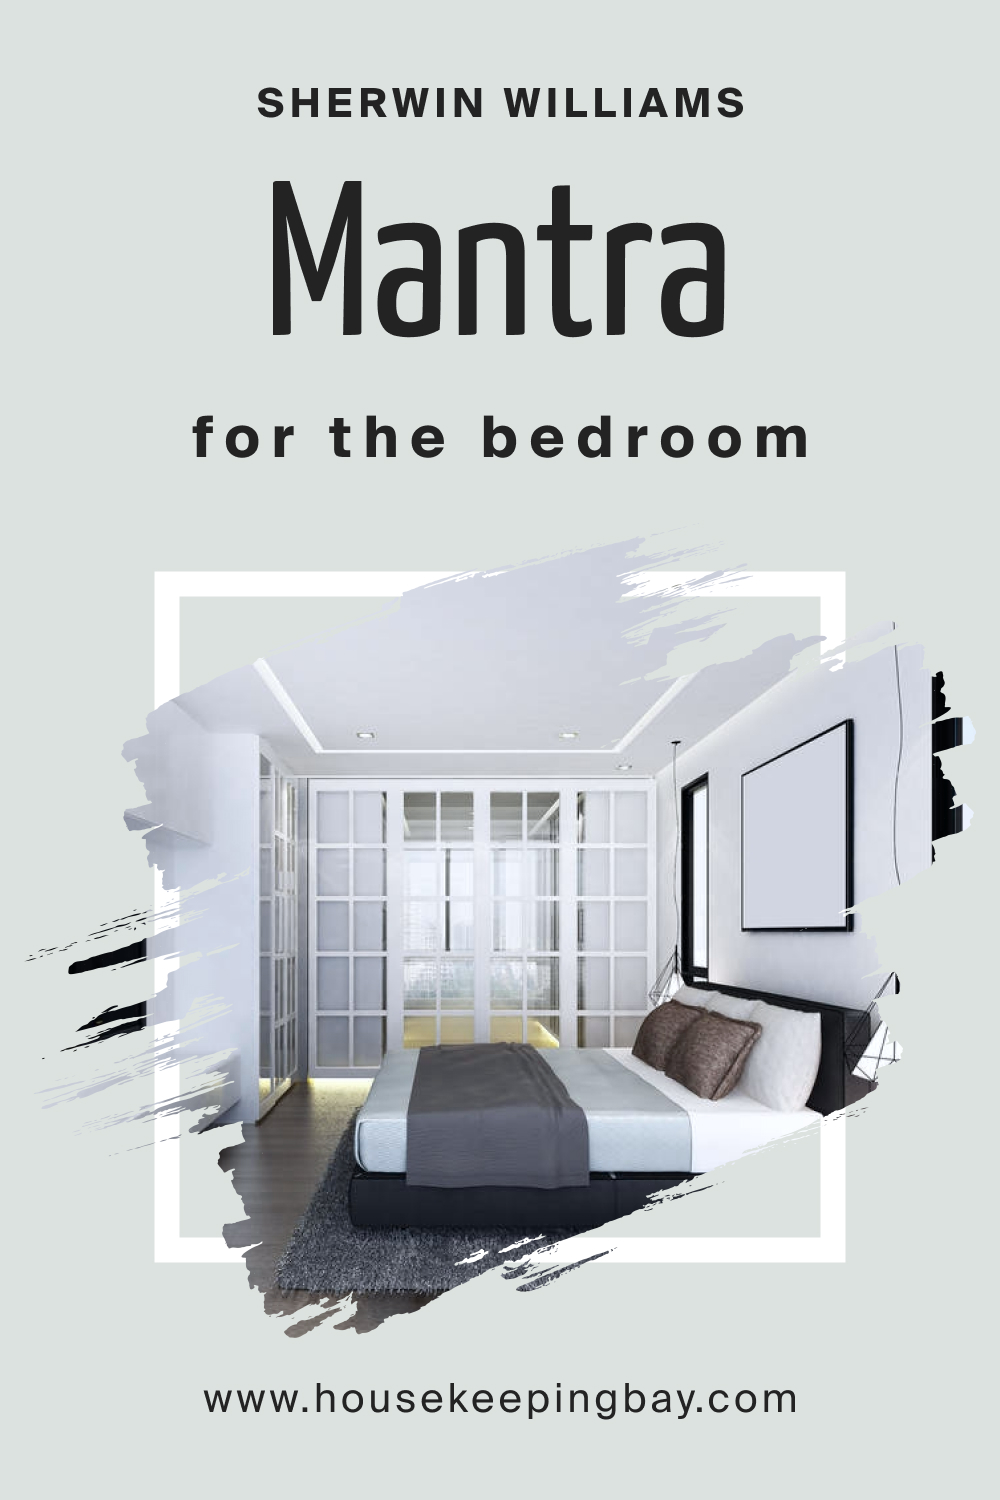 Sherwin Williams. SW 9631 Mantra For the bedroom